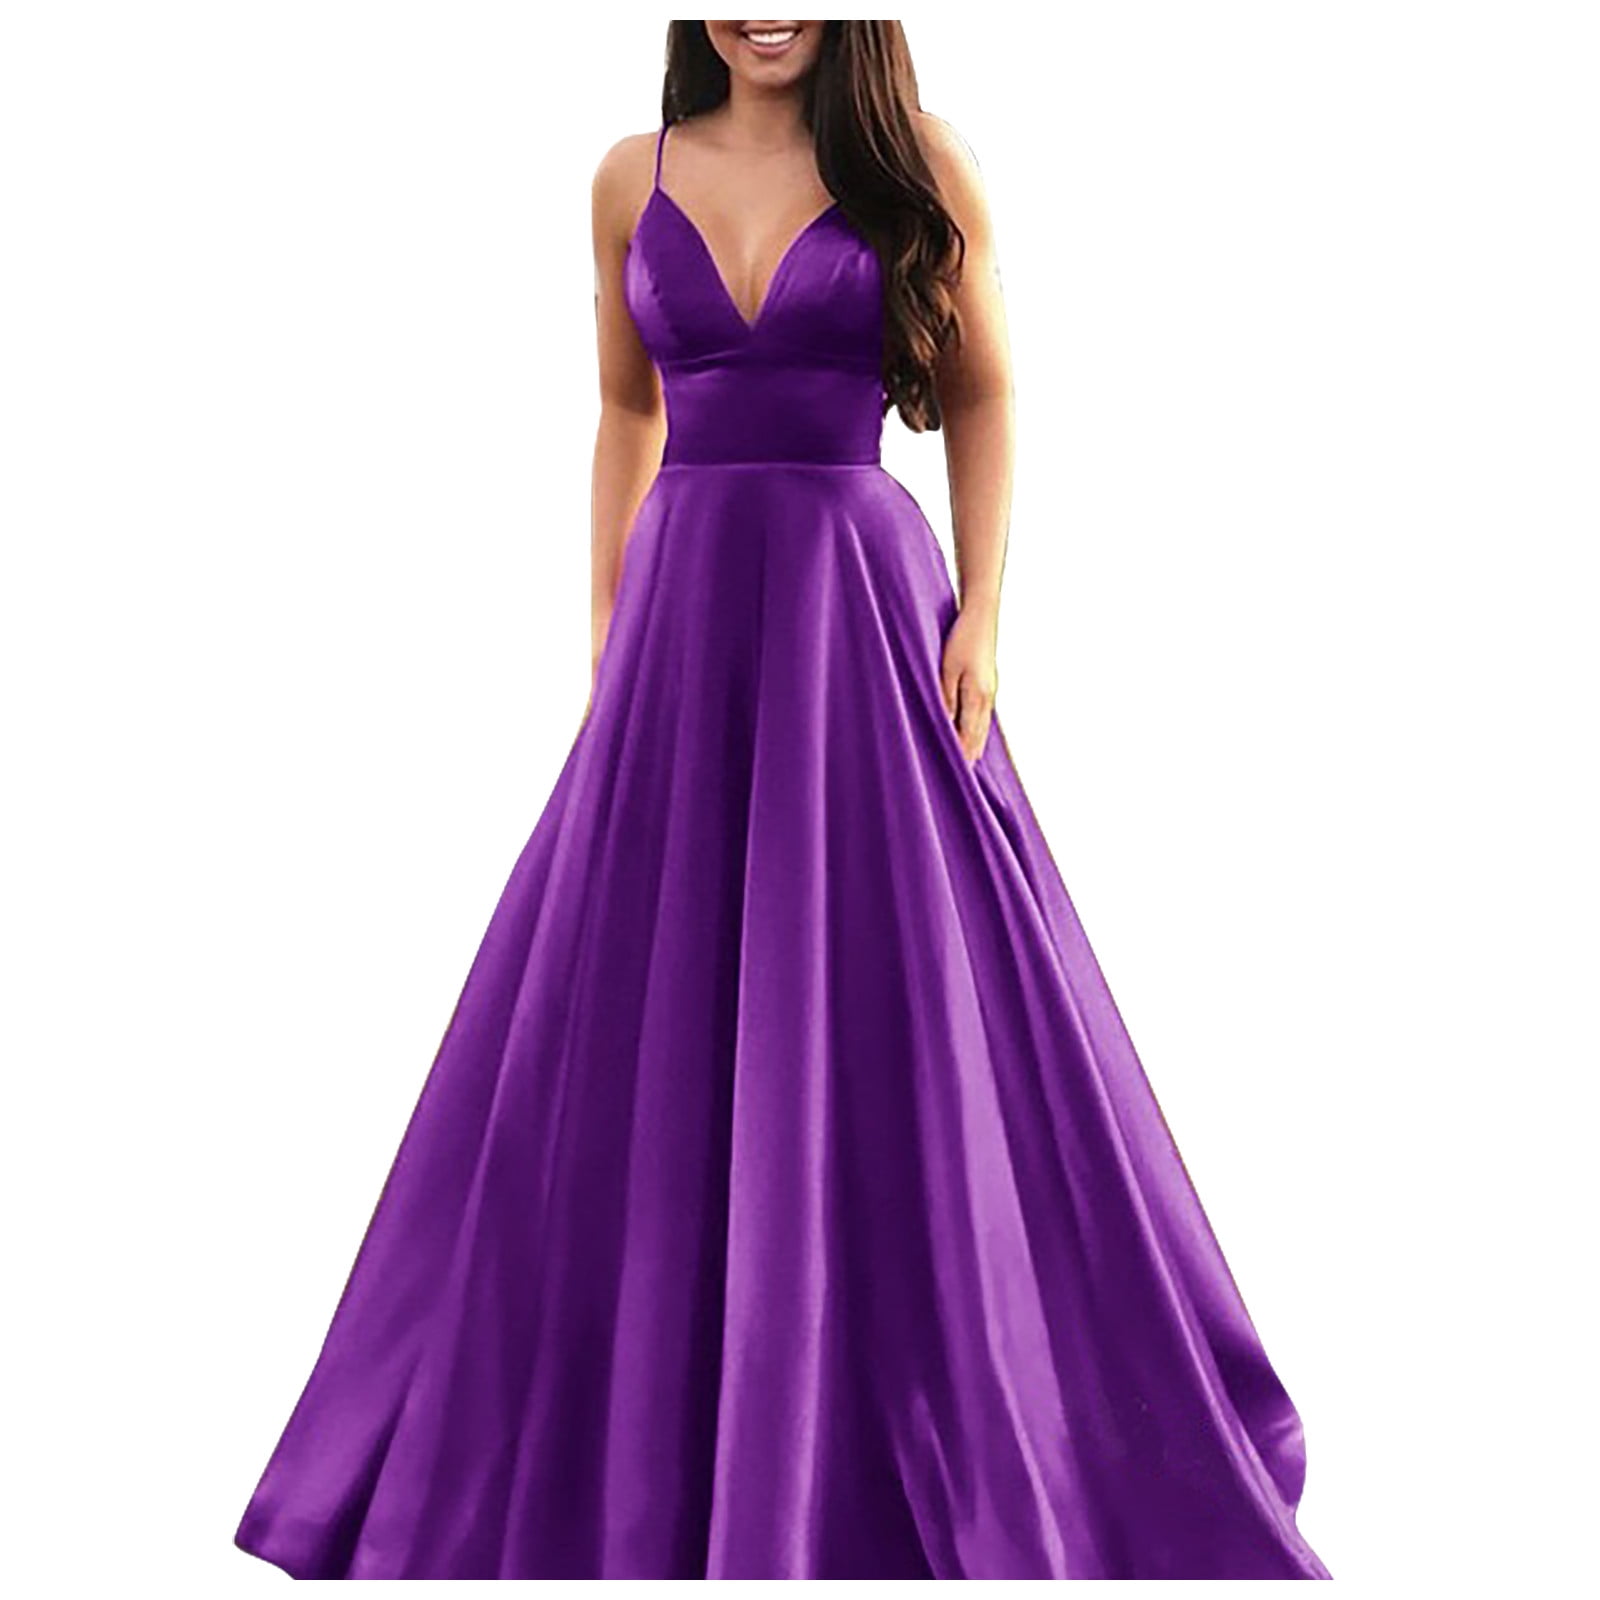 Aoochasliy Womens Prom Dress Clearance Prom Dresses V-Neck Solid Color ...